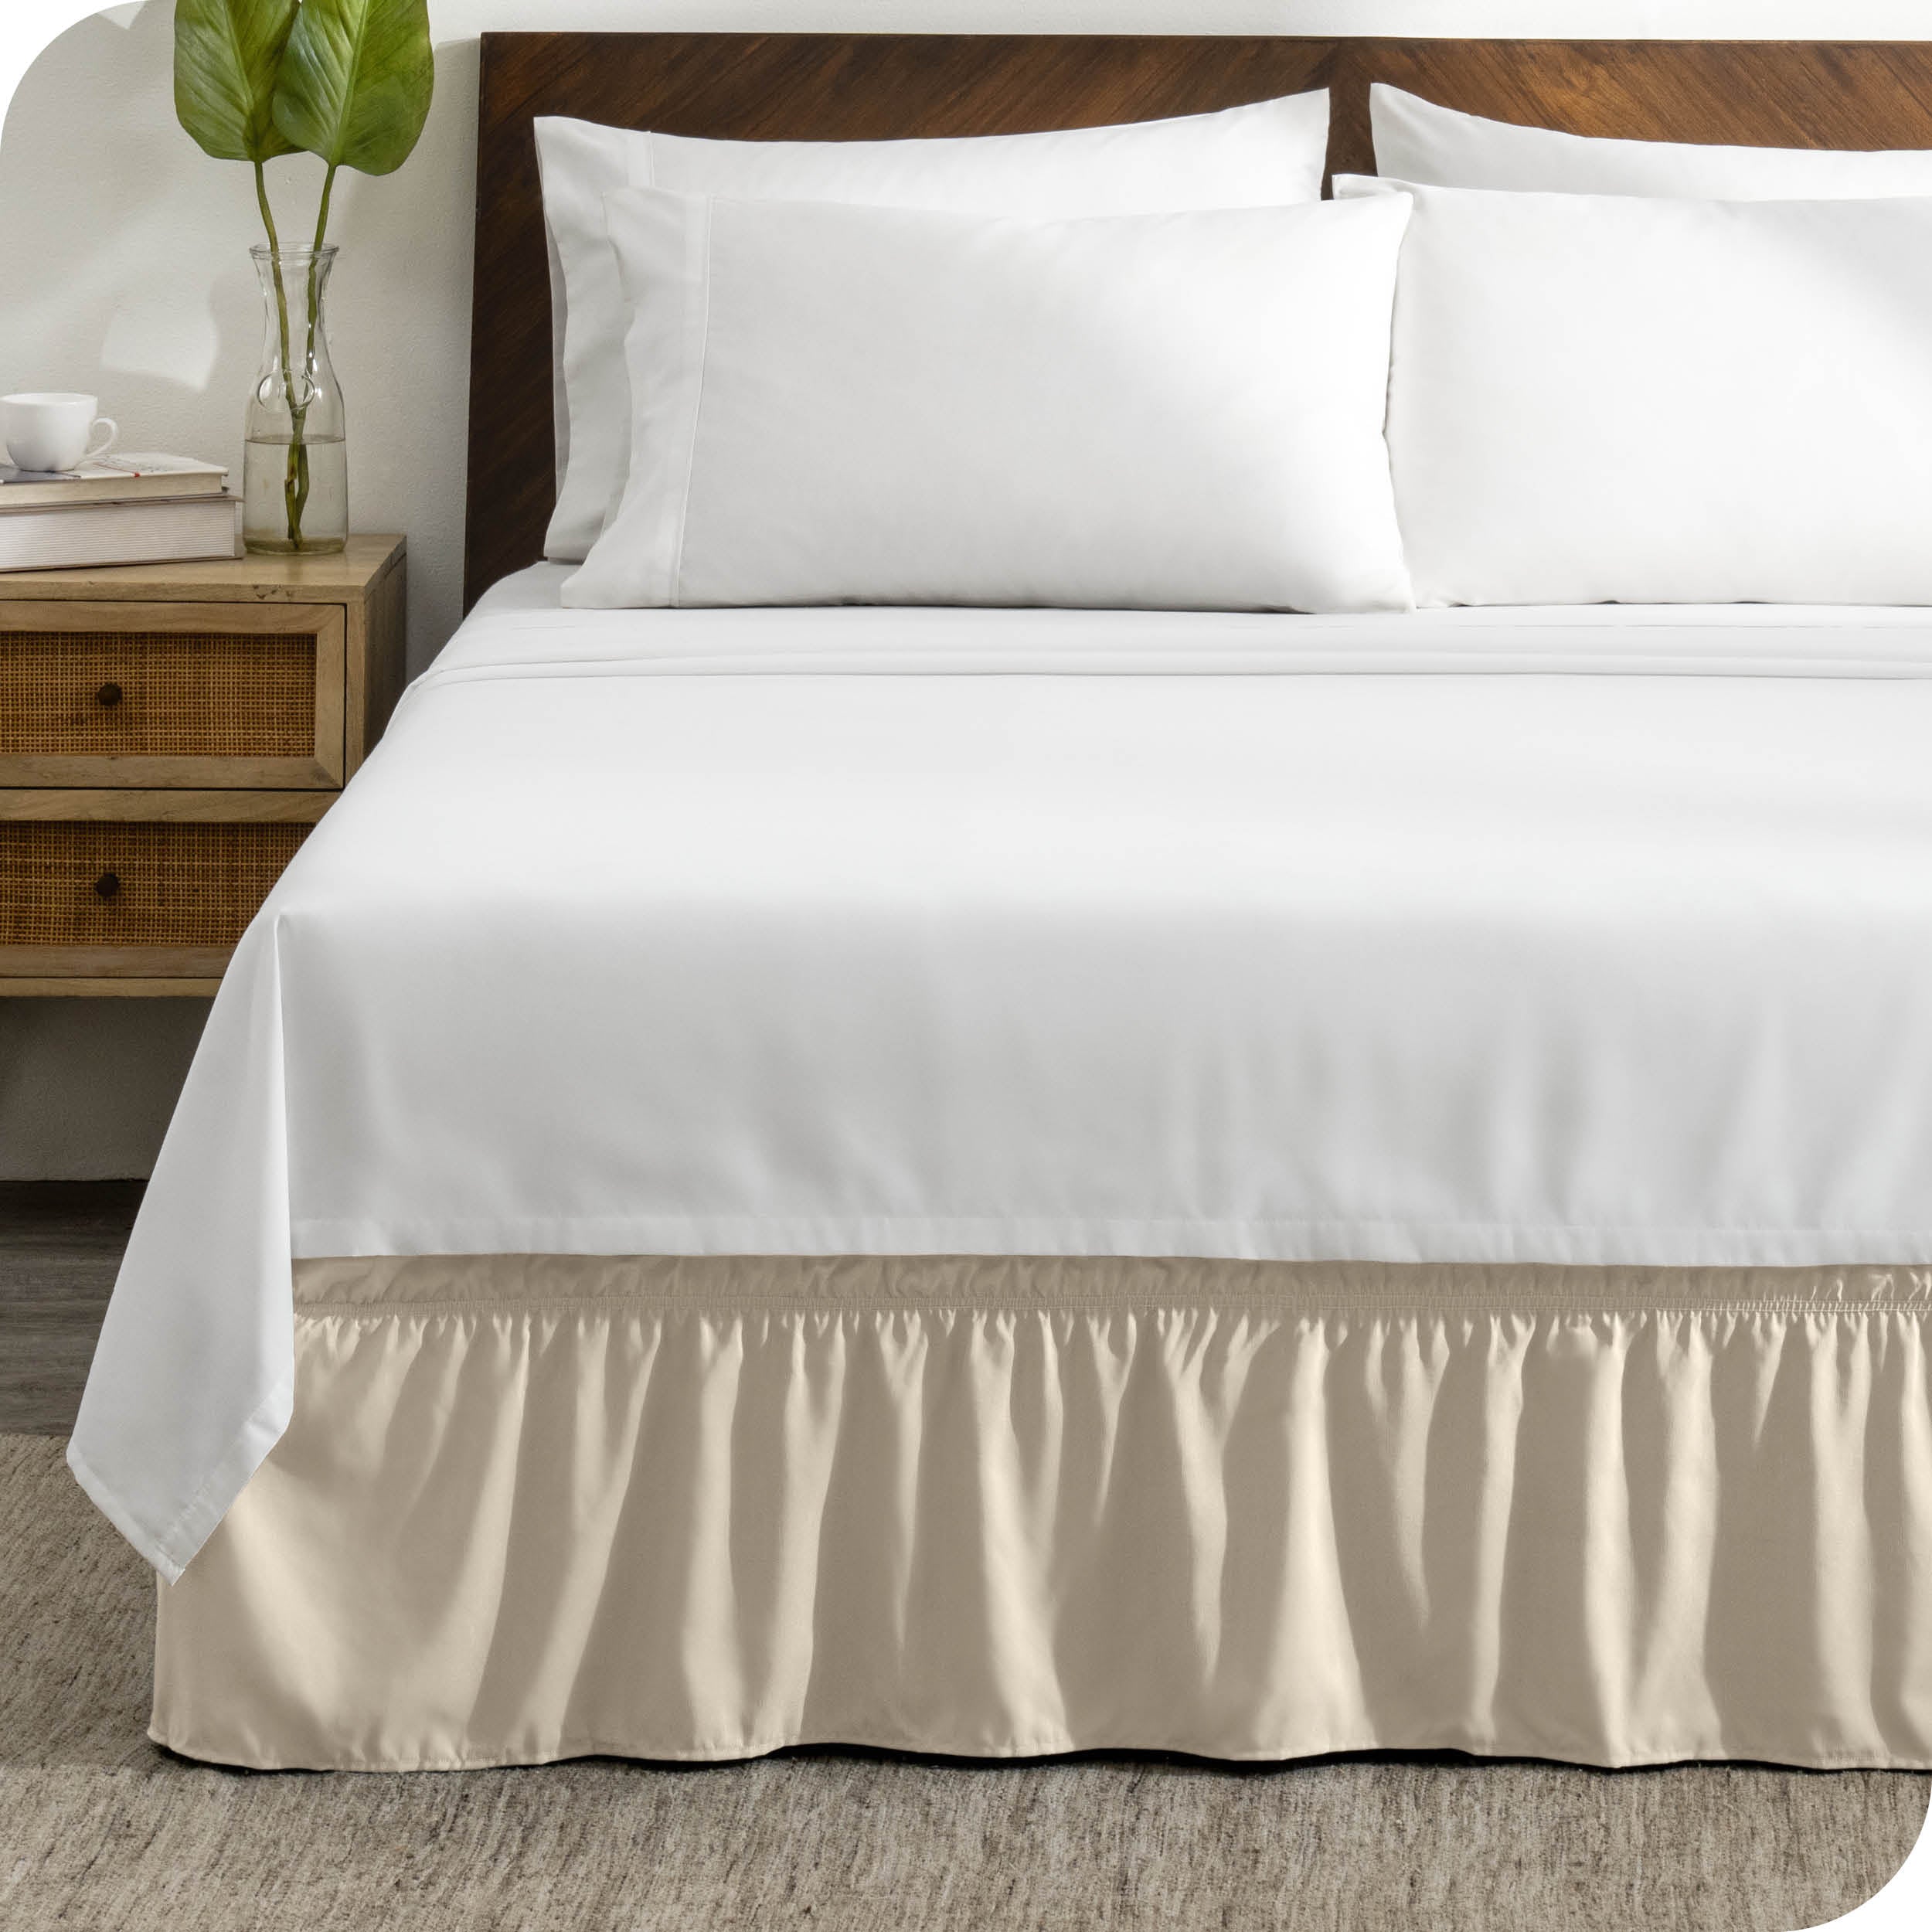 A wrap around bed skirt on a mattress with white bedding